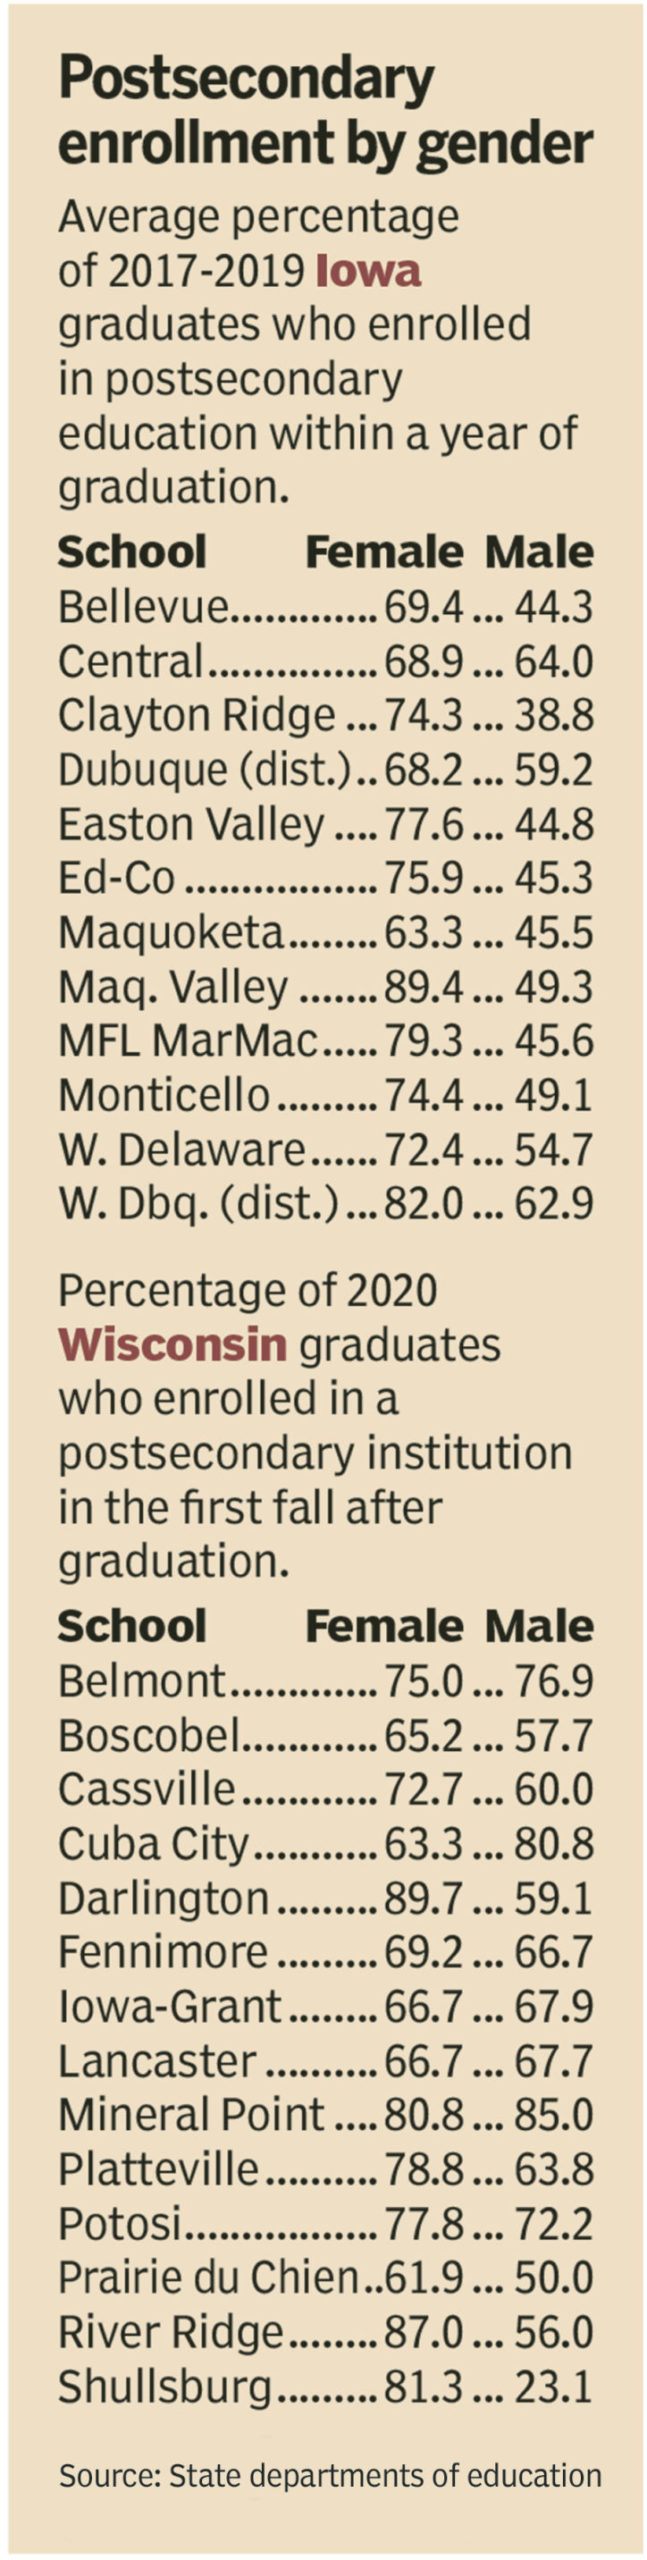 Percentages of recent Iowa and Wisconsin high school graduates who enrolled in postsecondary education by gender. 